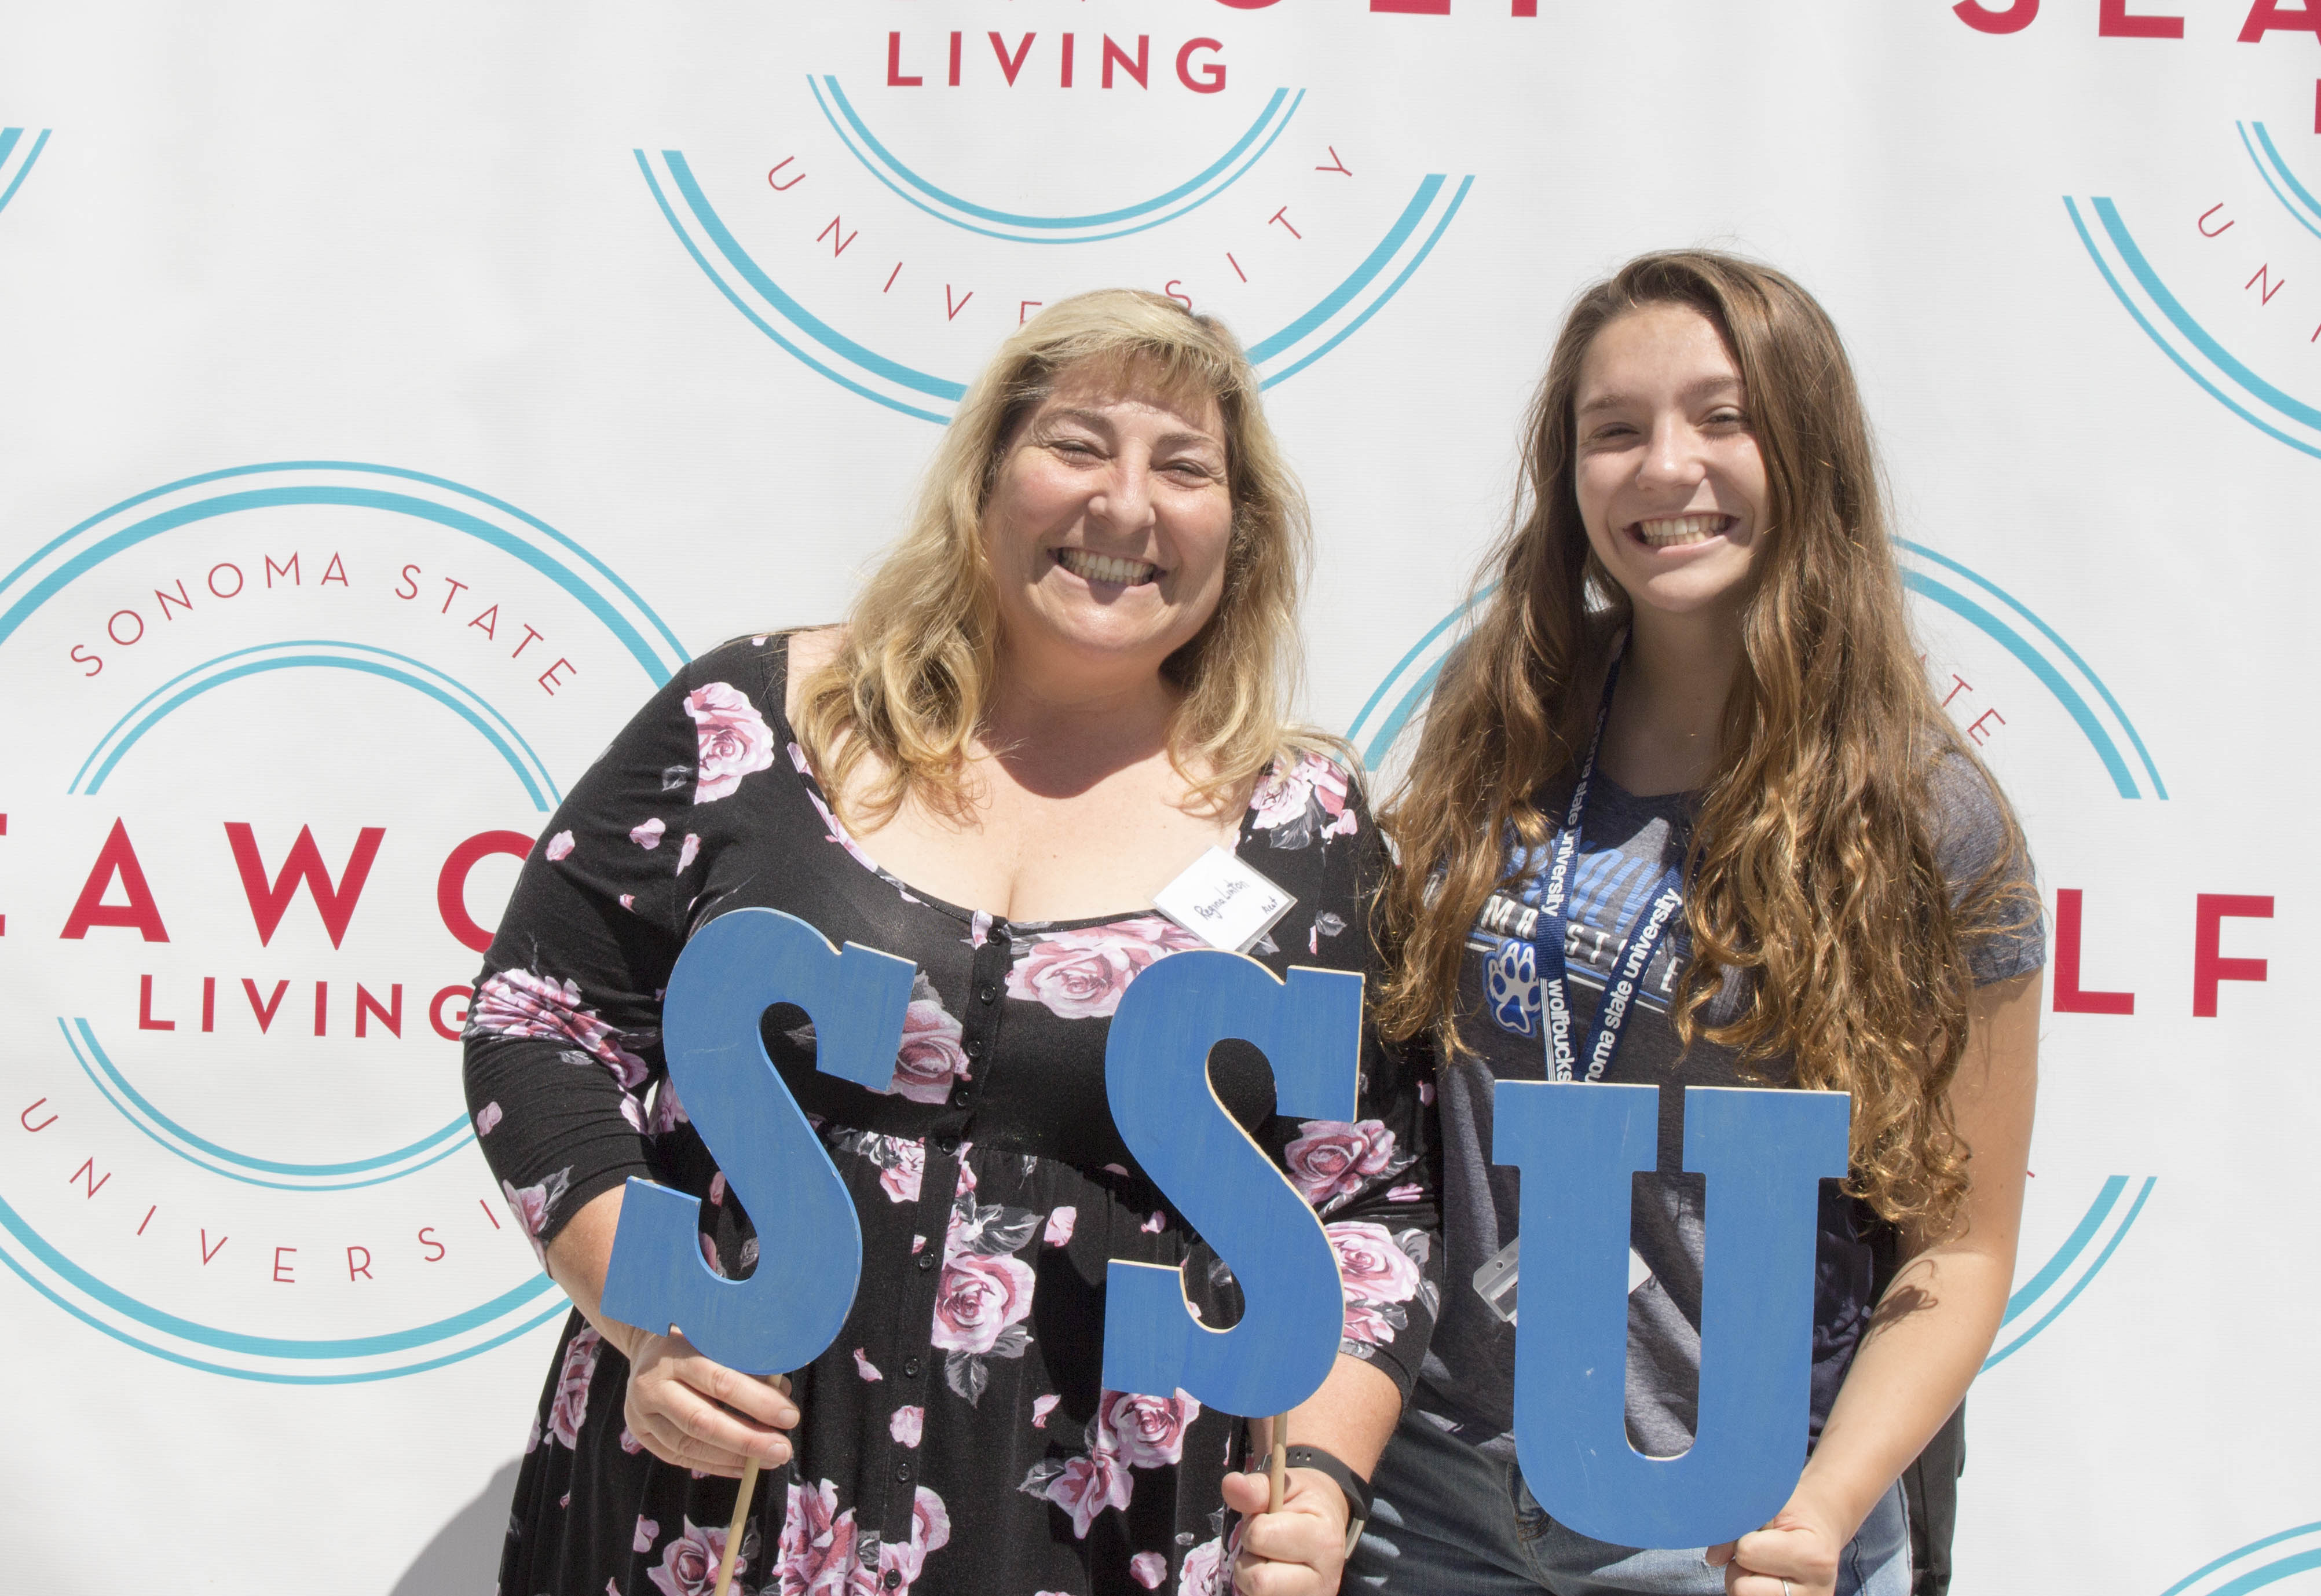 Parent and SSU student smile excitedly at orientation